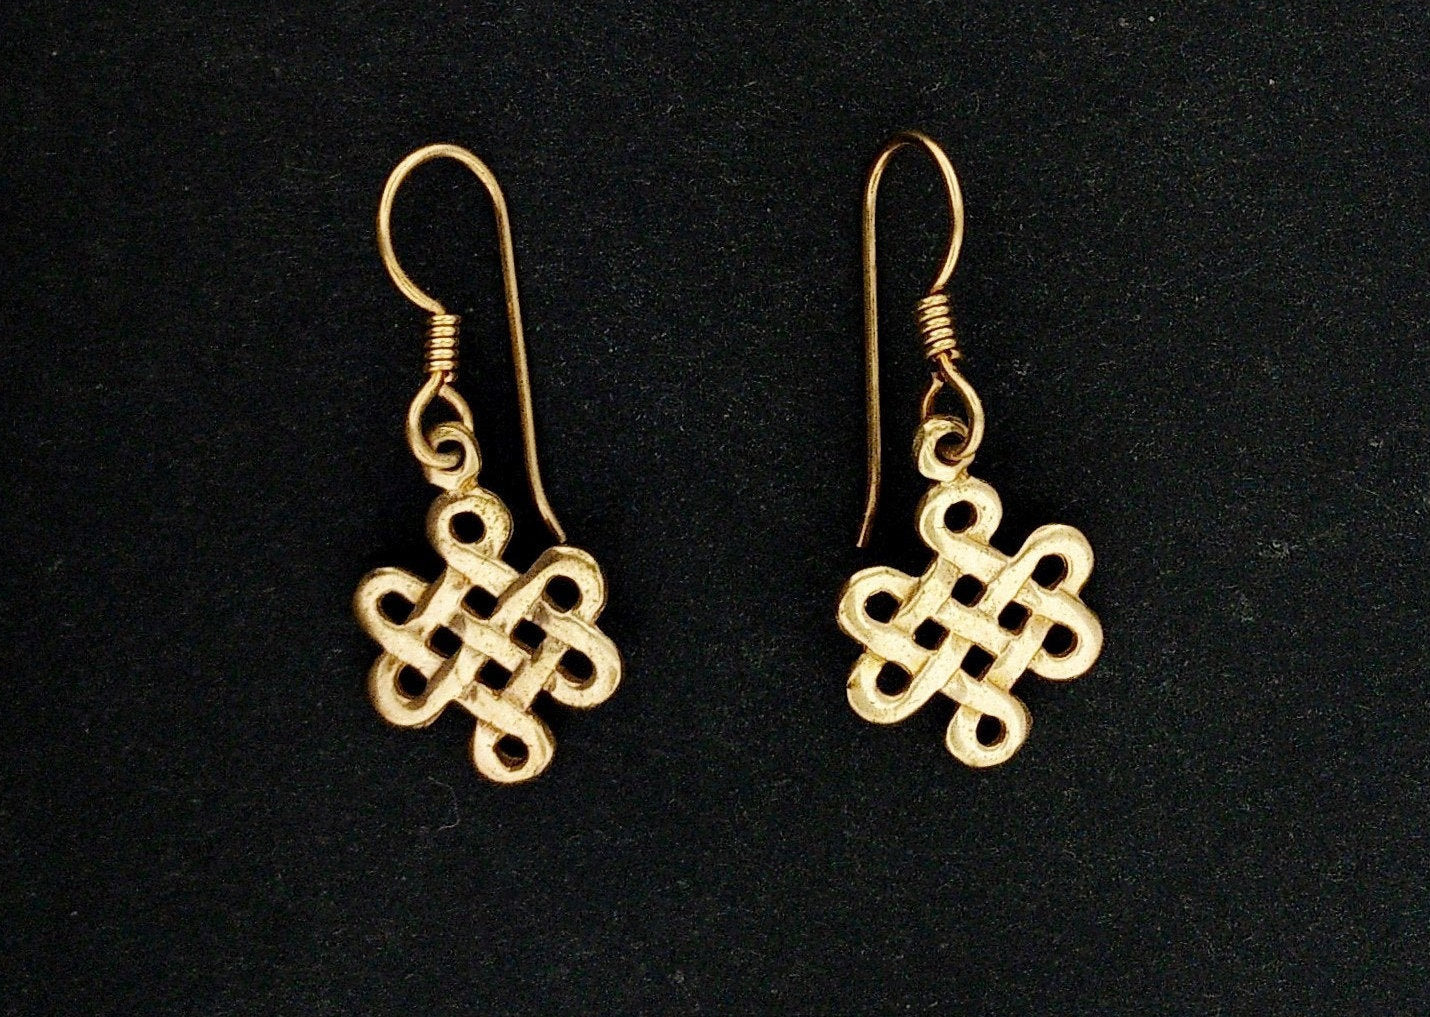 Small Endless Knot Earrings in Sterling Silver or Antique Bronze, Eternal knot Earrings, Shrivatsa Knot Earrings, Celtic Knot Earrings, Bronze Endless Knot Earrings, Small Knot Earrings In Bronze, Celtic Knot Earrings, Celtic Bronze Jewellery